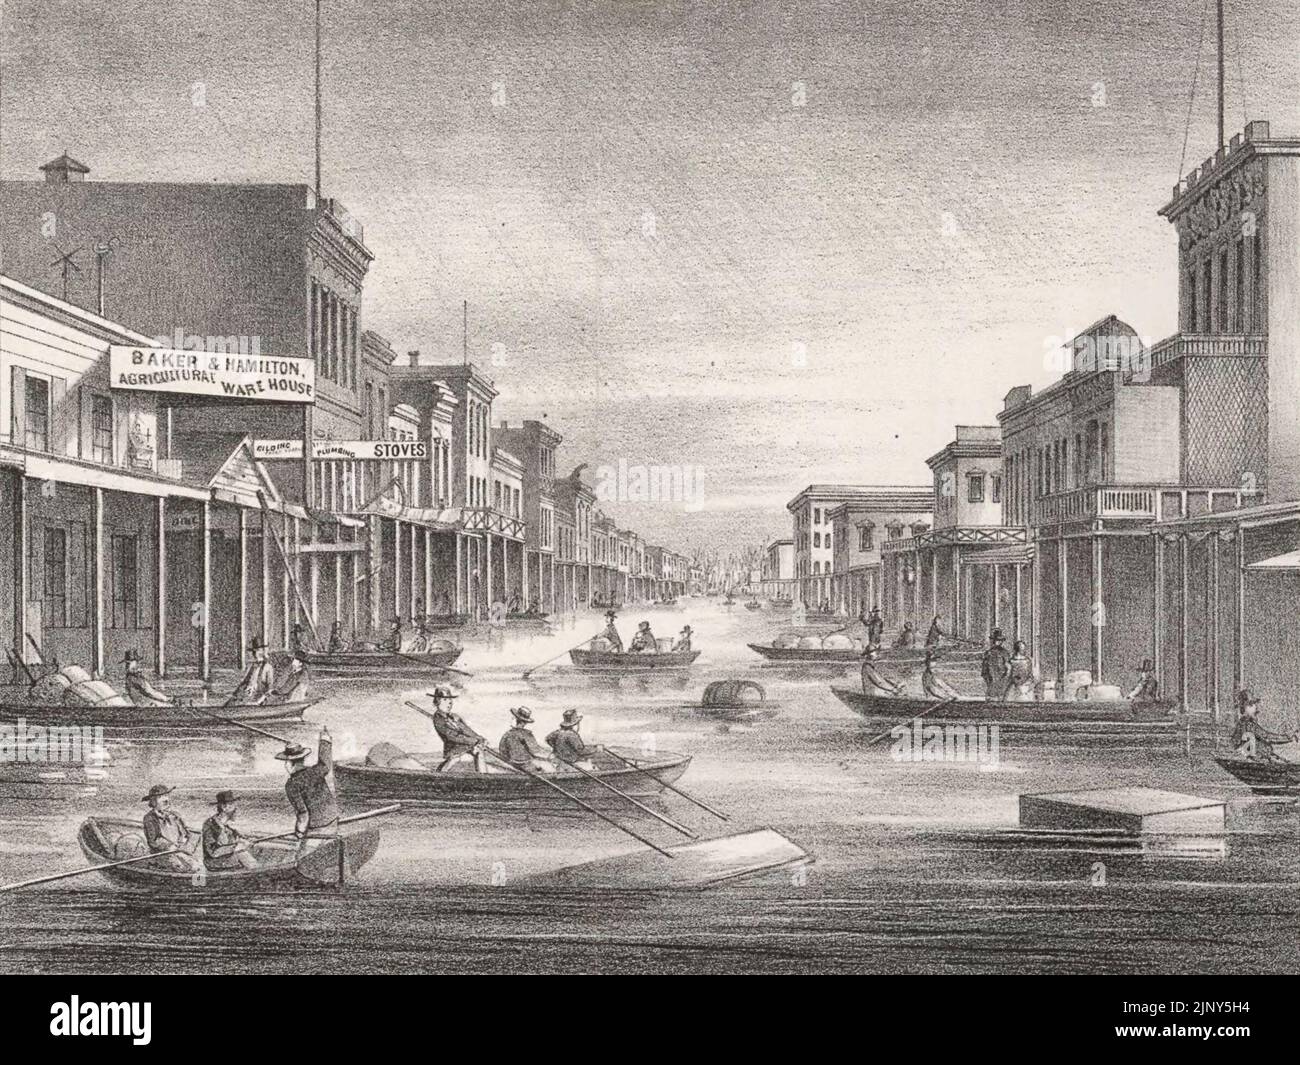 Inundation of the State Capitol, city of Sacramento, 1862 - J street in downtown Sacramento seen from levee showing flood of 1862; people in boats make their way between buildings in flooded city streets - California Flood, 1862 Stock Photo